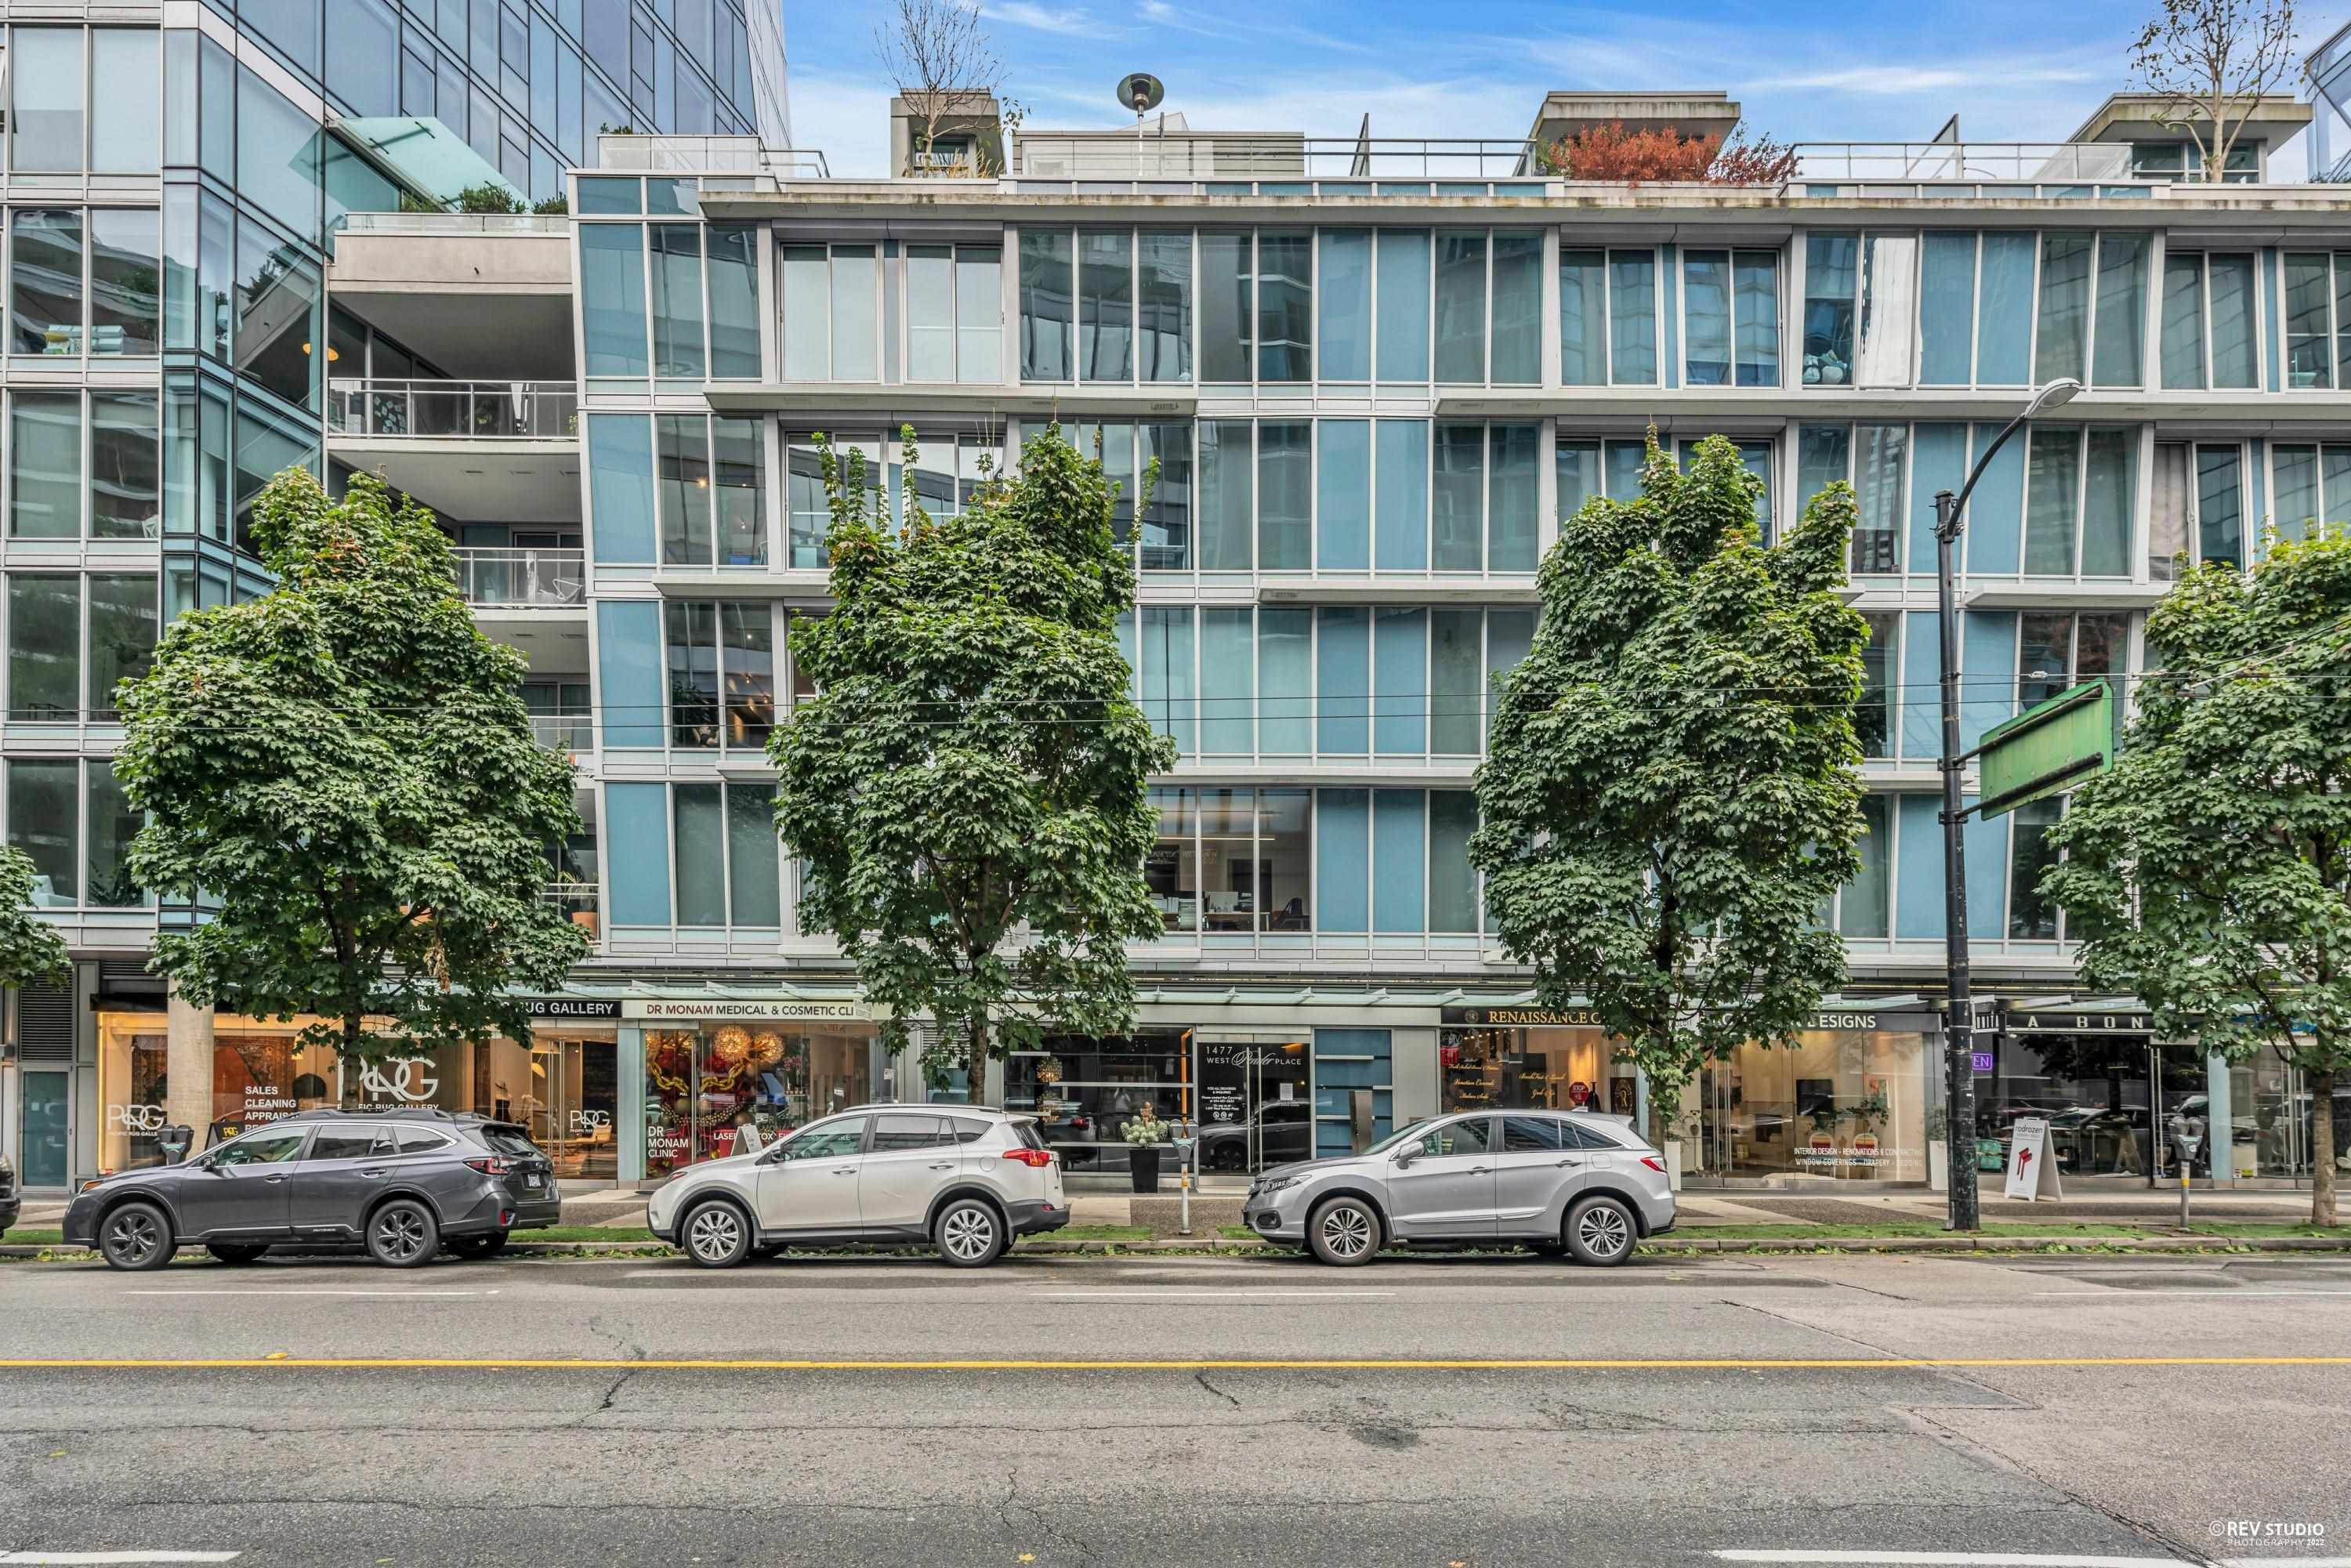 New property listed in Coal Harbour, Vancouver West